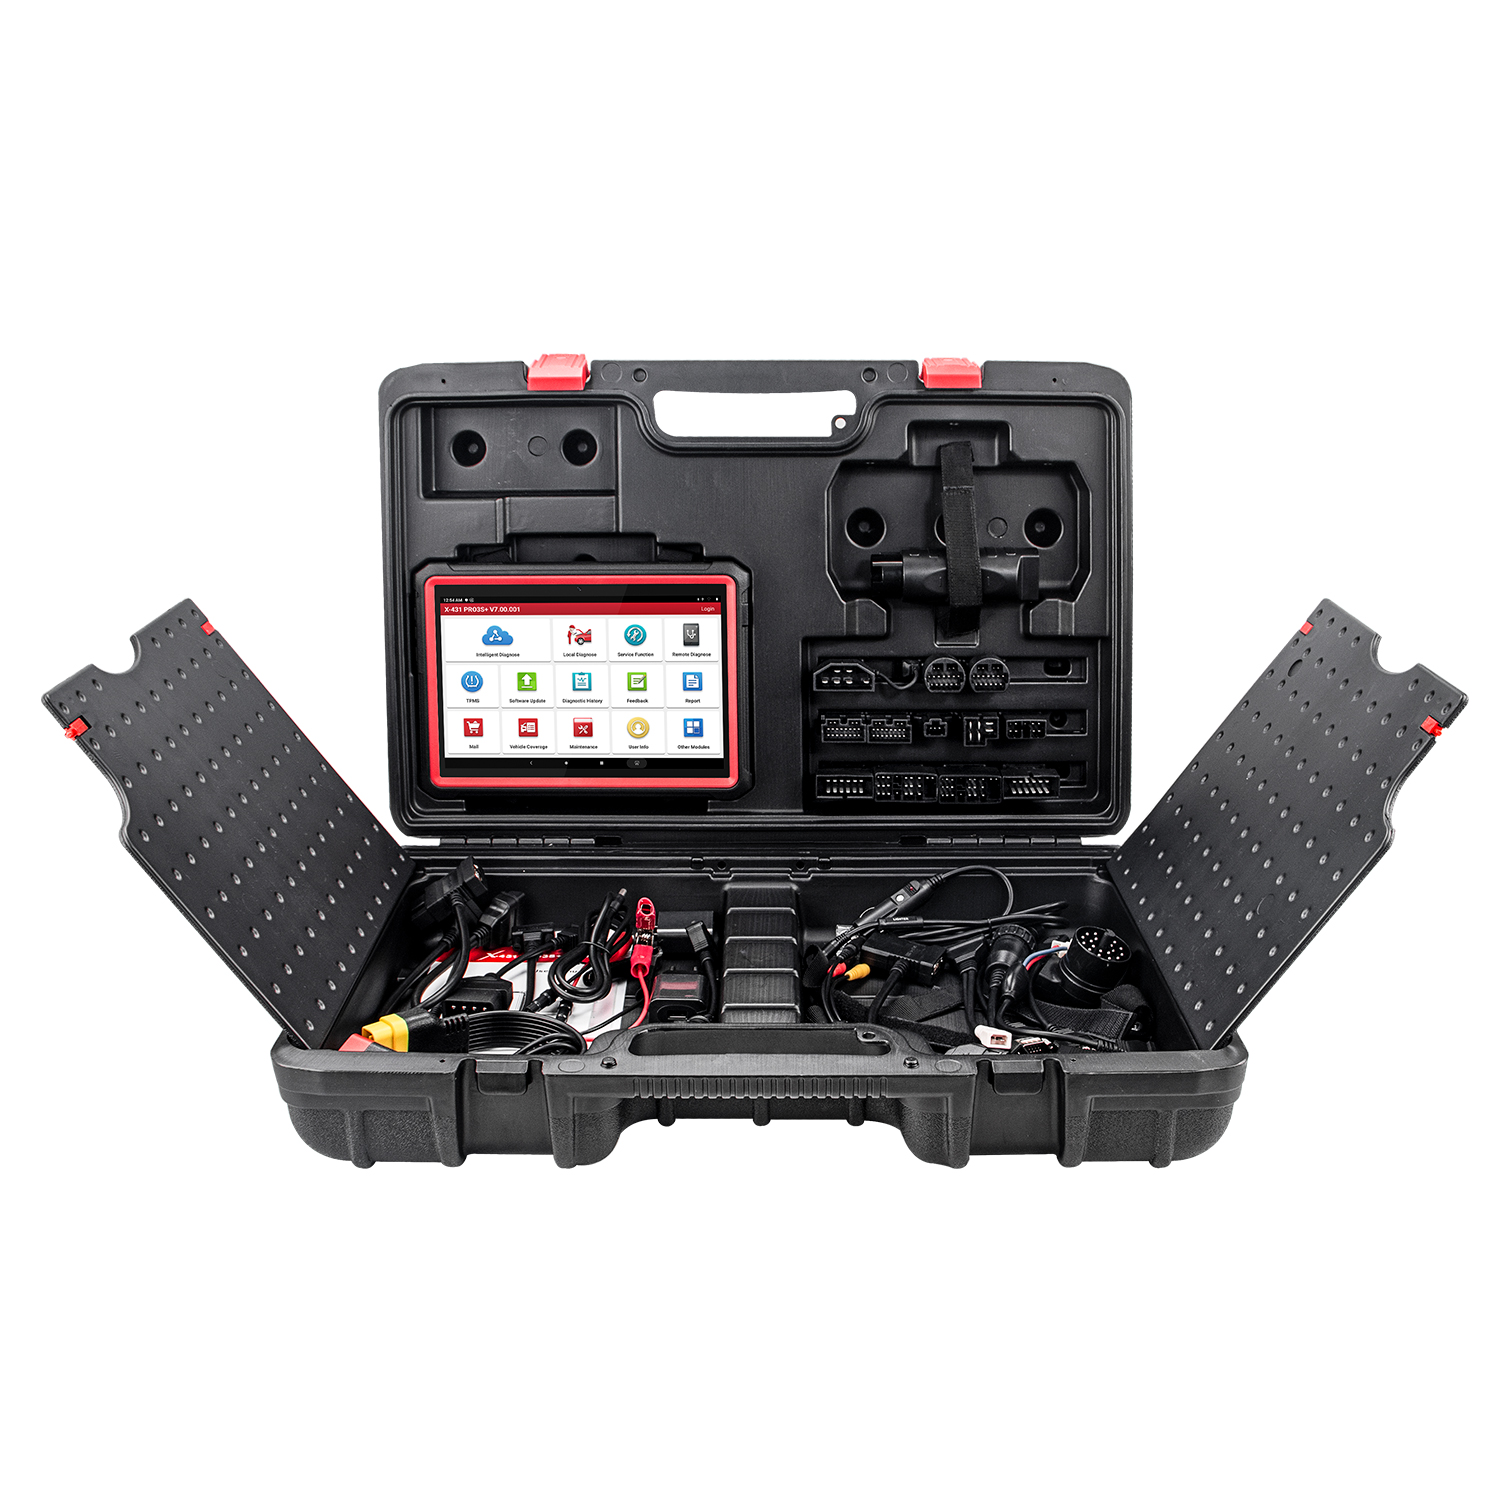 LAUNCH X431 PRO3S+ Pro3 S+ 10.1 Bi-Directional Scan Tool Upgraded of X431  V Supports Topology Mapping, 35+ Reset Service ECU Coding AutoAuth